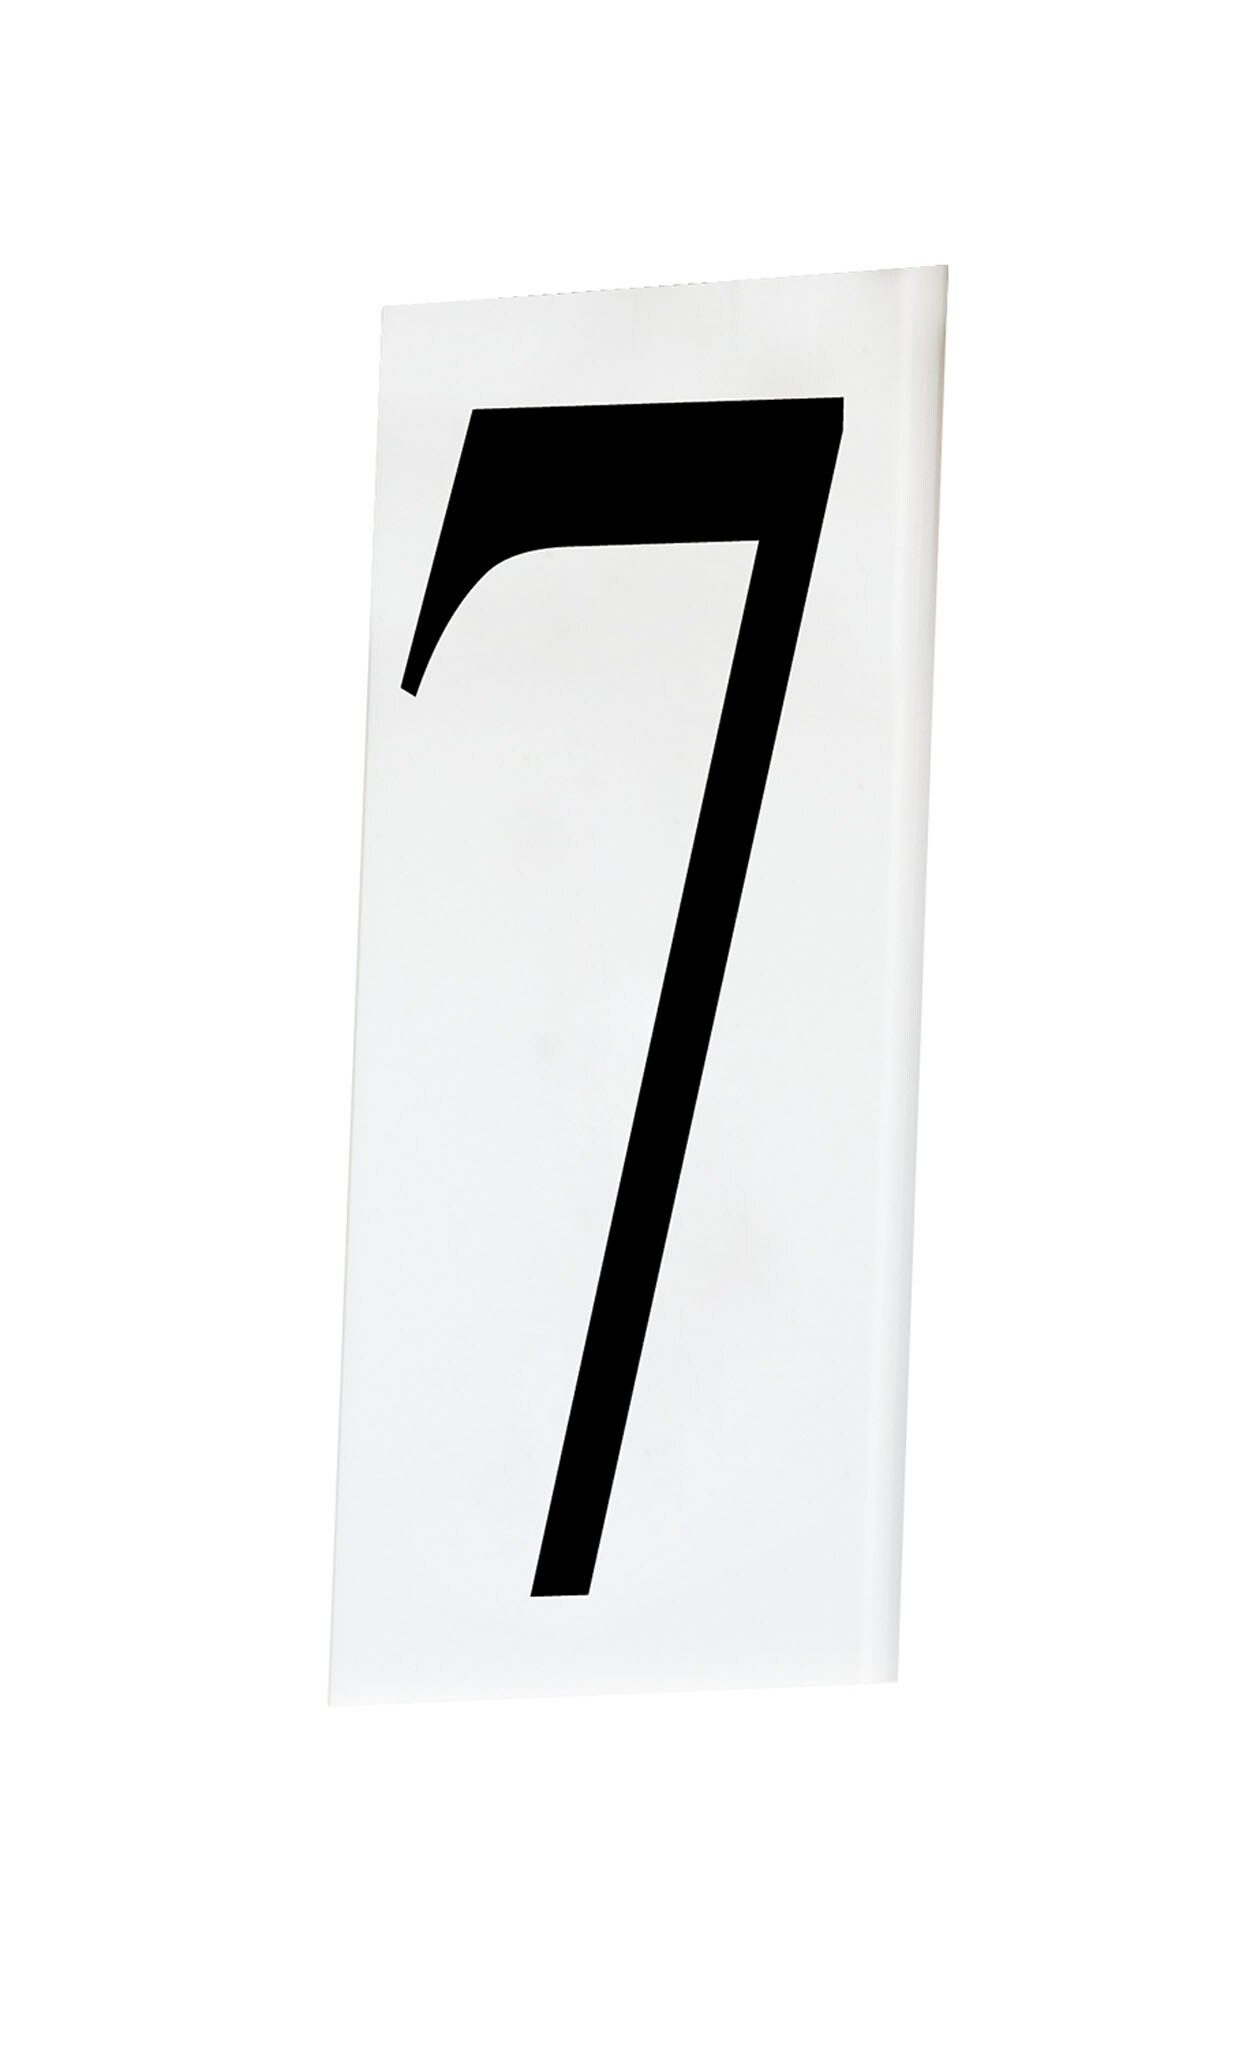 HOUSE OFFICE BUILDING NUMBER LETTER SET SIGN WHITE ACRYLIC 